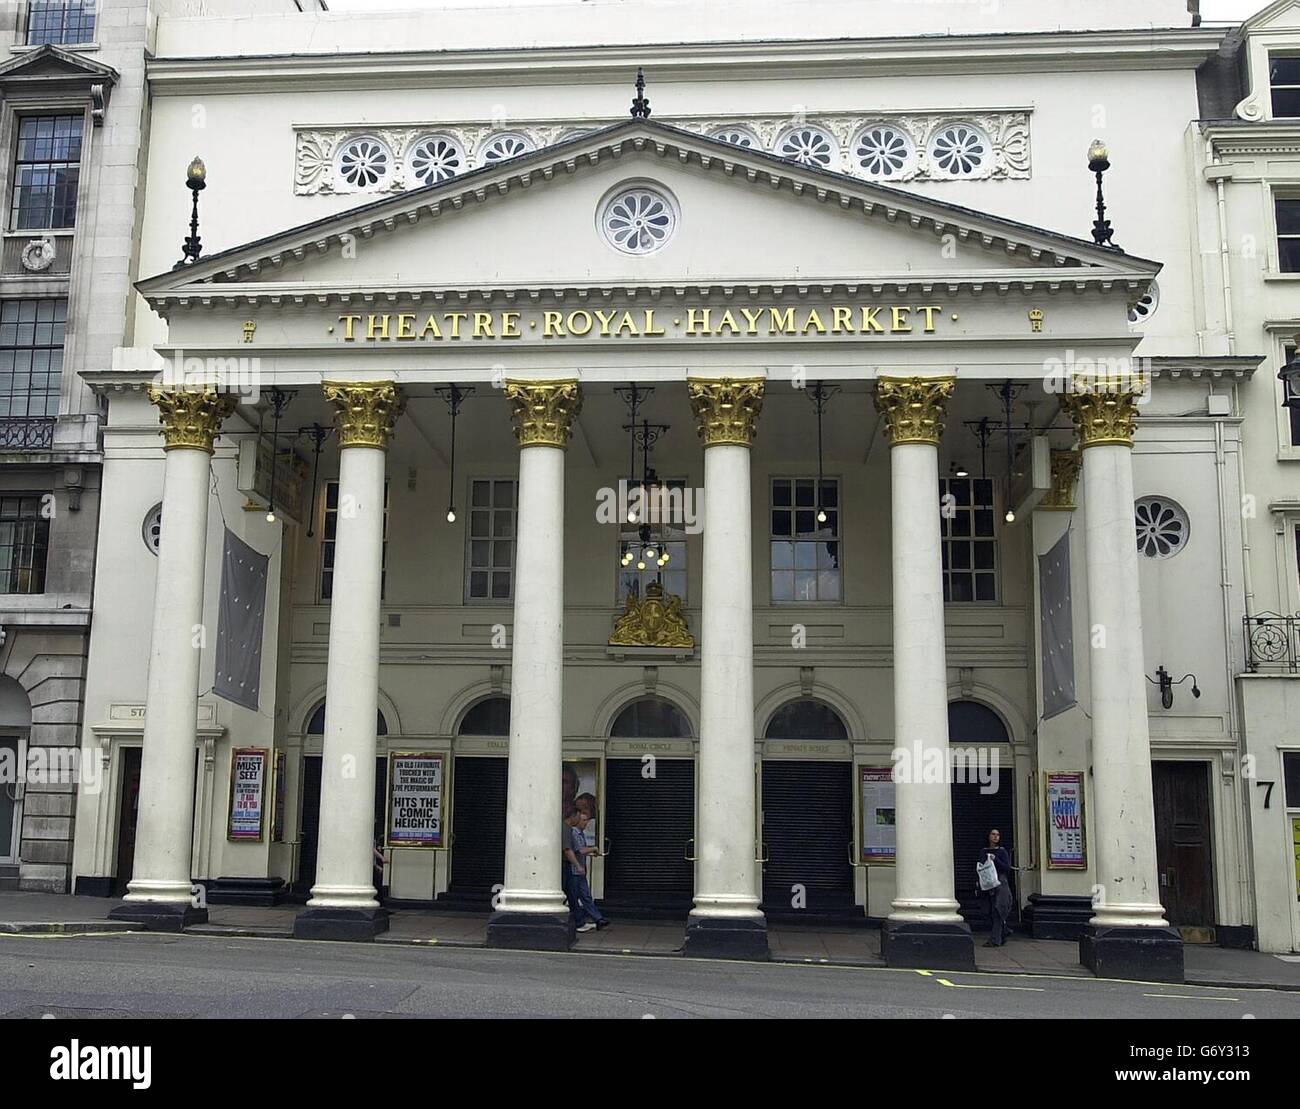 The Theatre Royal Haymarket in London, where fifteen theatre-goers were injured last night during a performance of When Harry Met Sally after plaster from the ceiling and fell in to the auditorium. Police said a chandelier came away from the ceiling and dropped 4ft before being held by its safety rope. Stock Photo